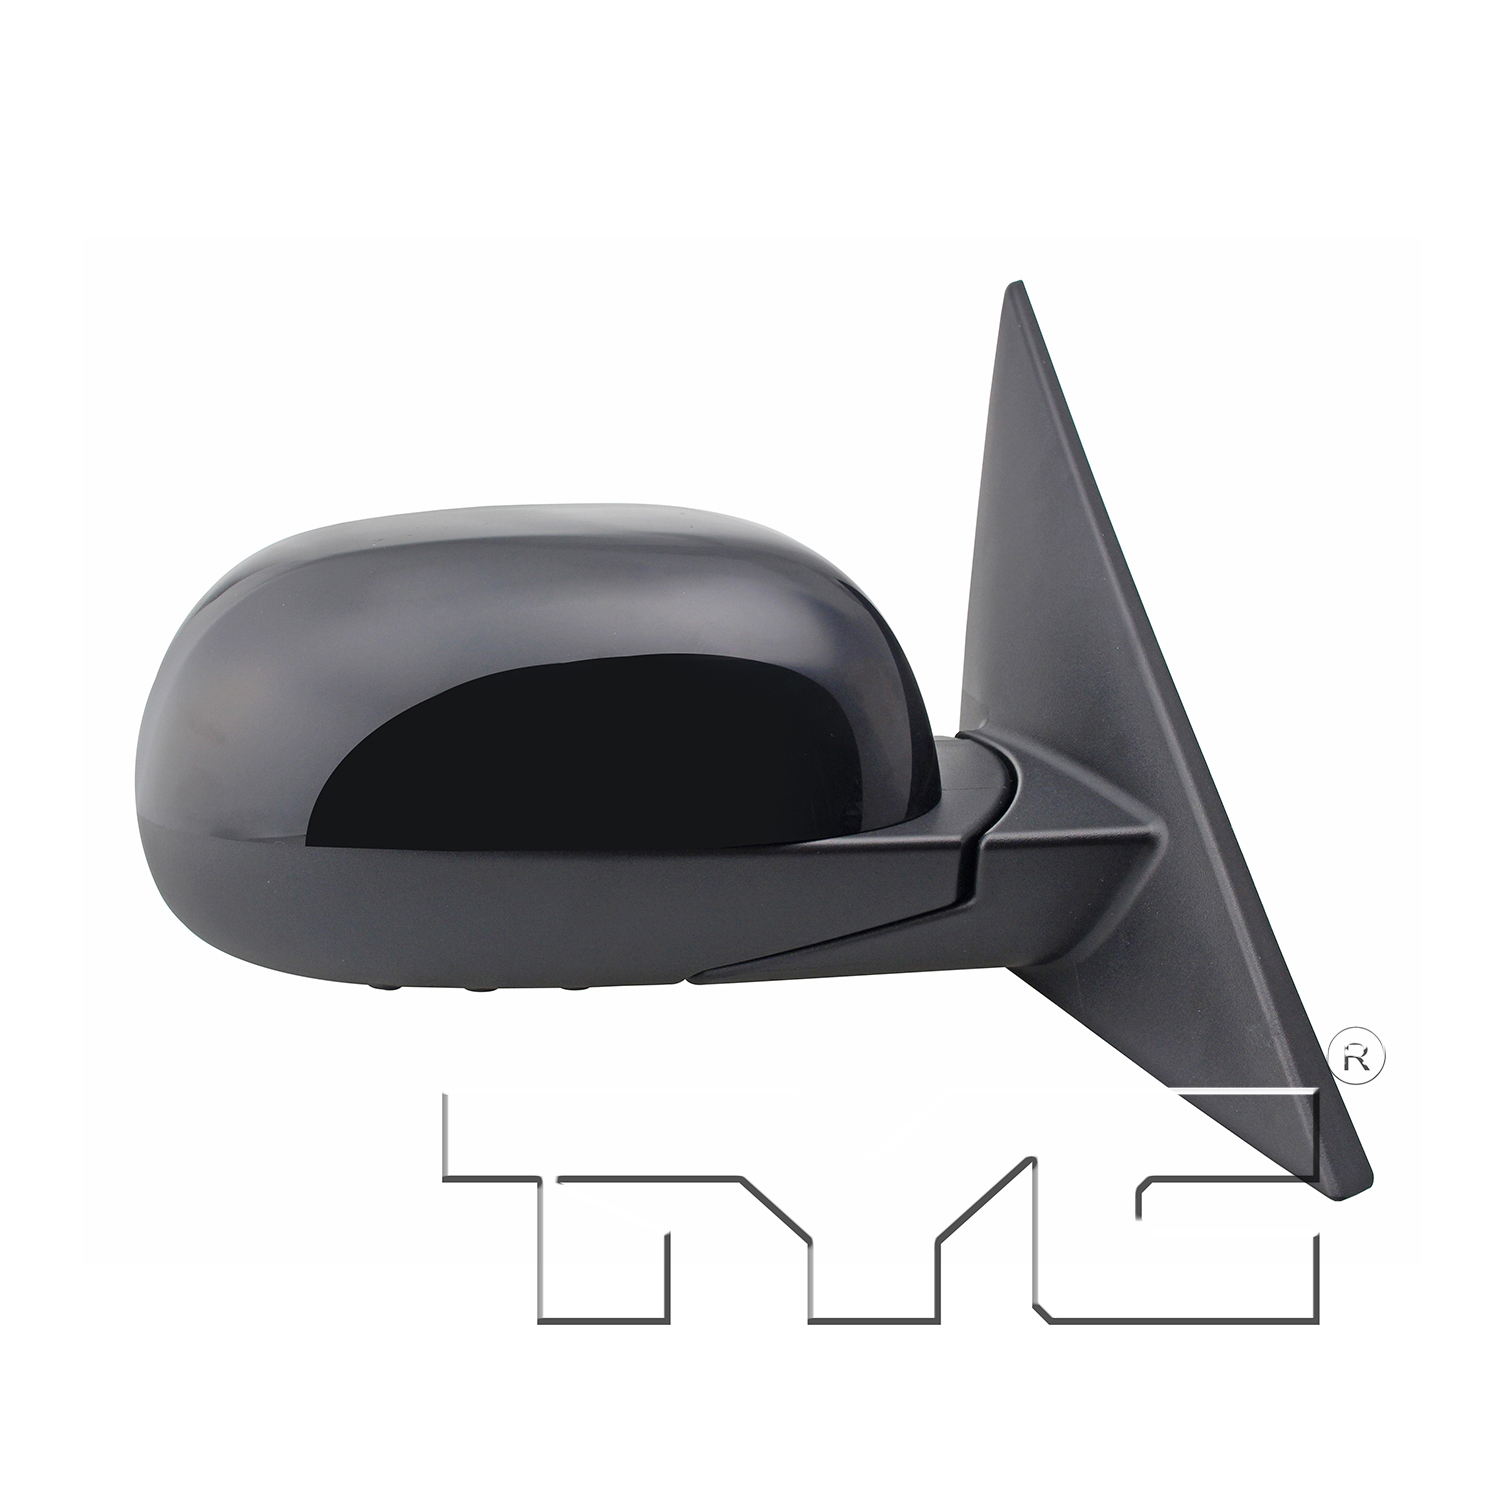 Aftermarket MIRRORS for KIA - SOUL, SOUL,14-19,RT Mirror outside rear view